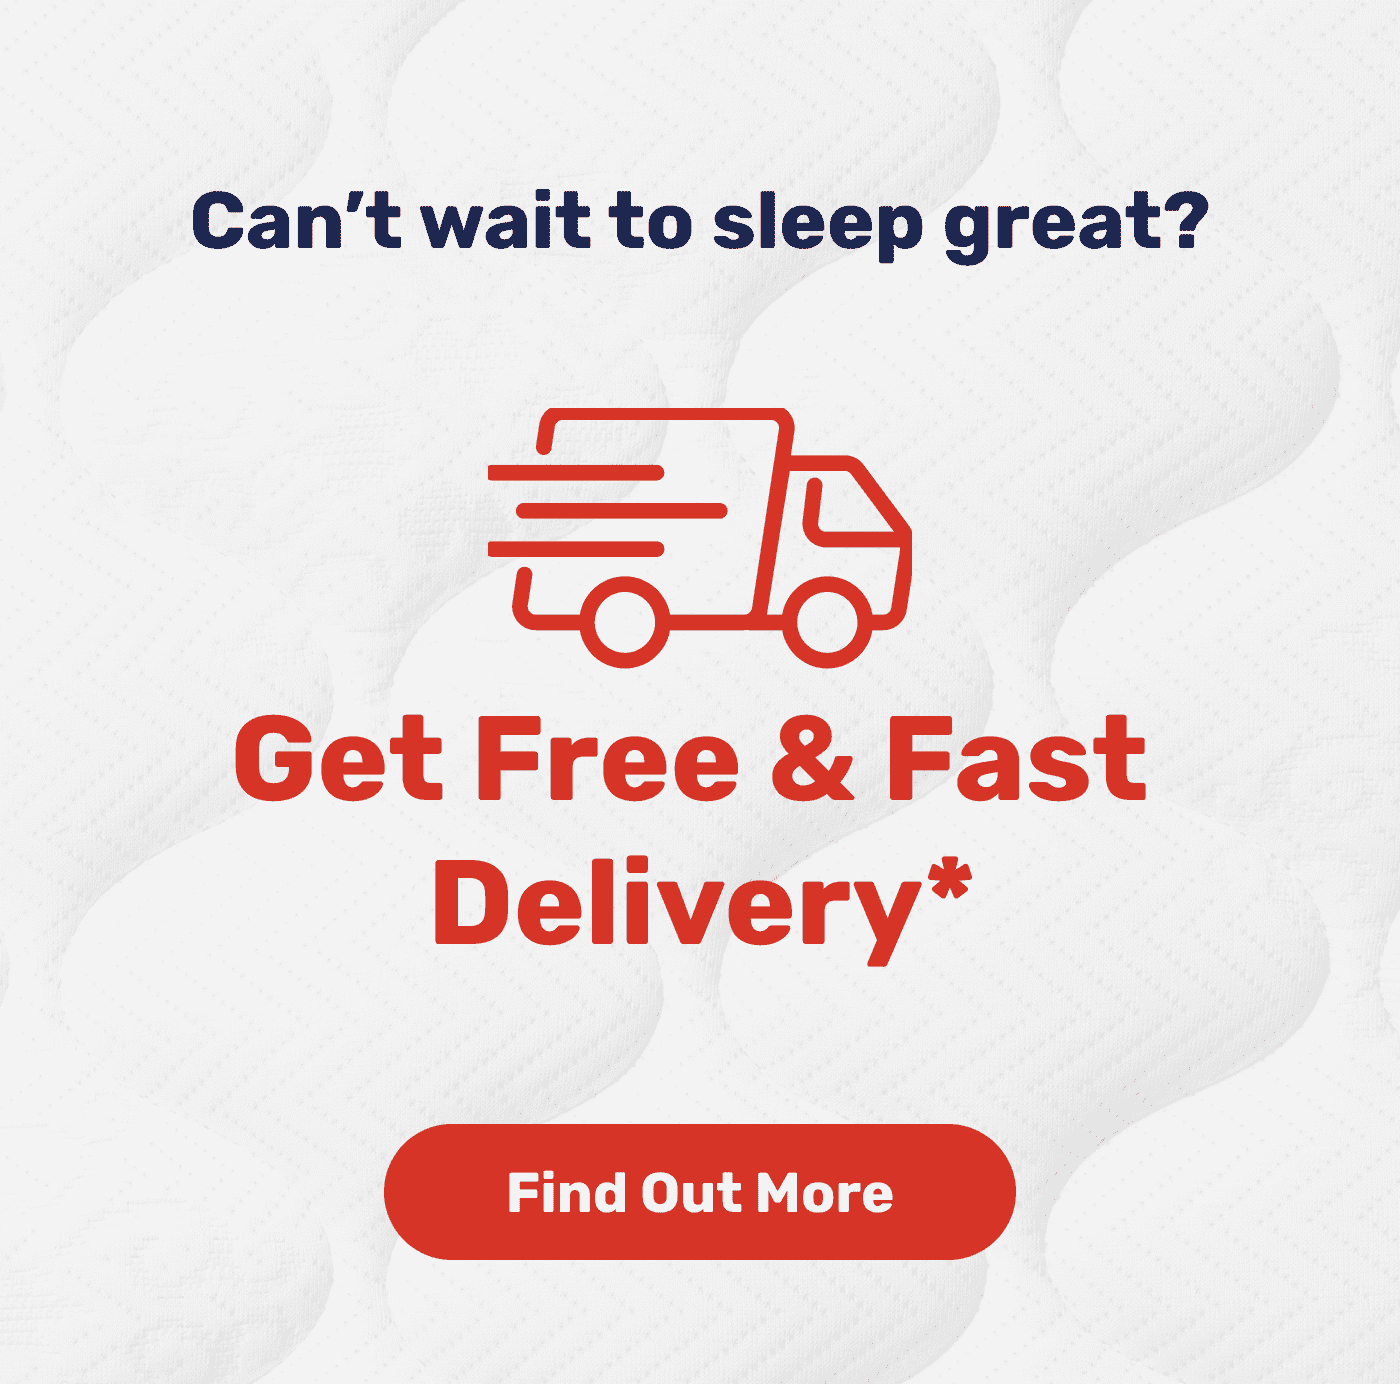 Get Free & Fast Delivery*